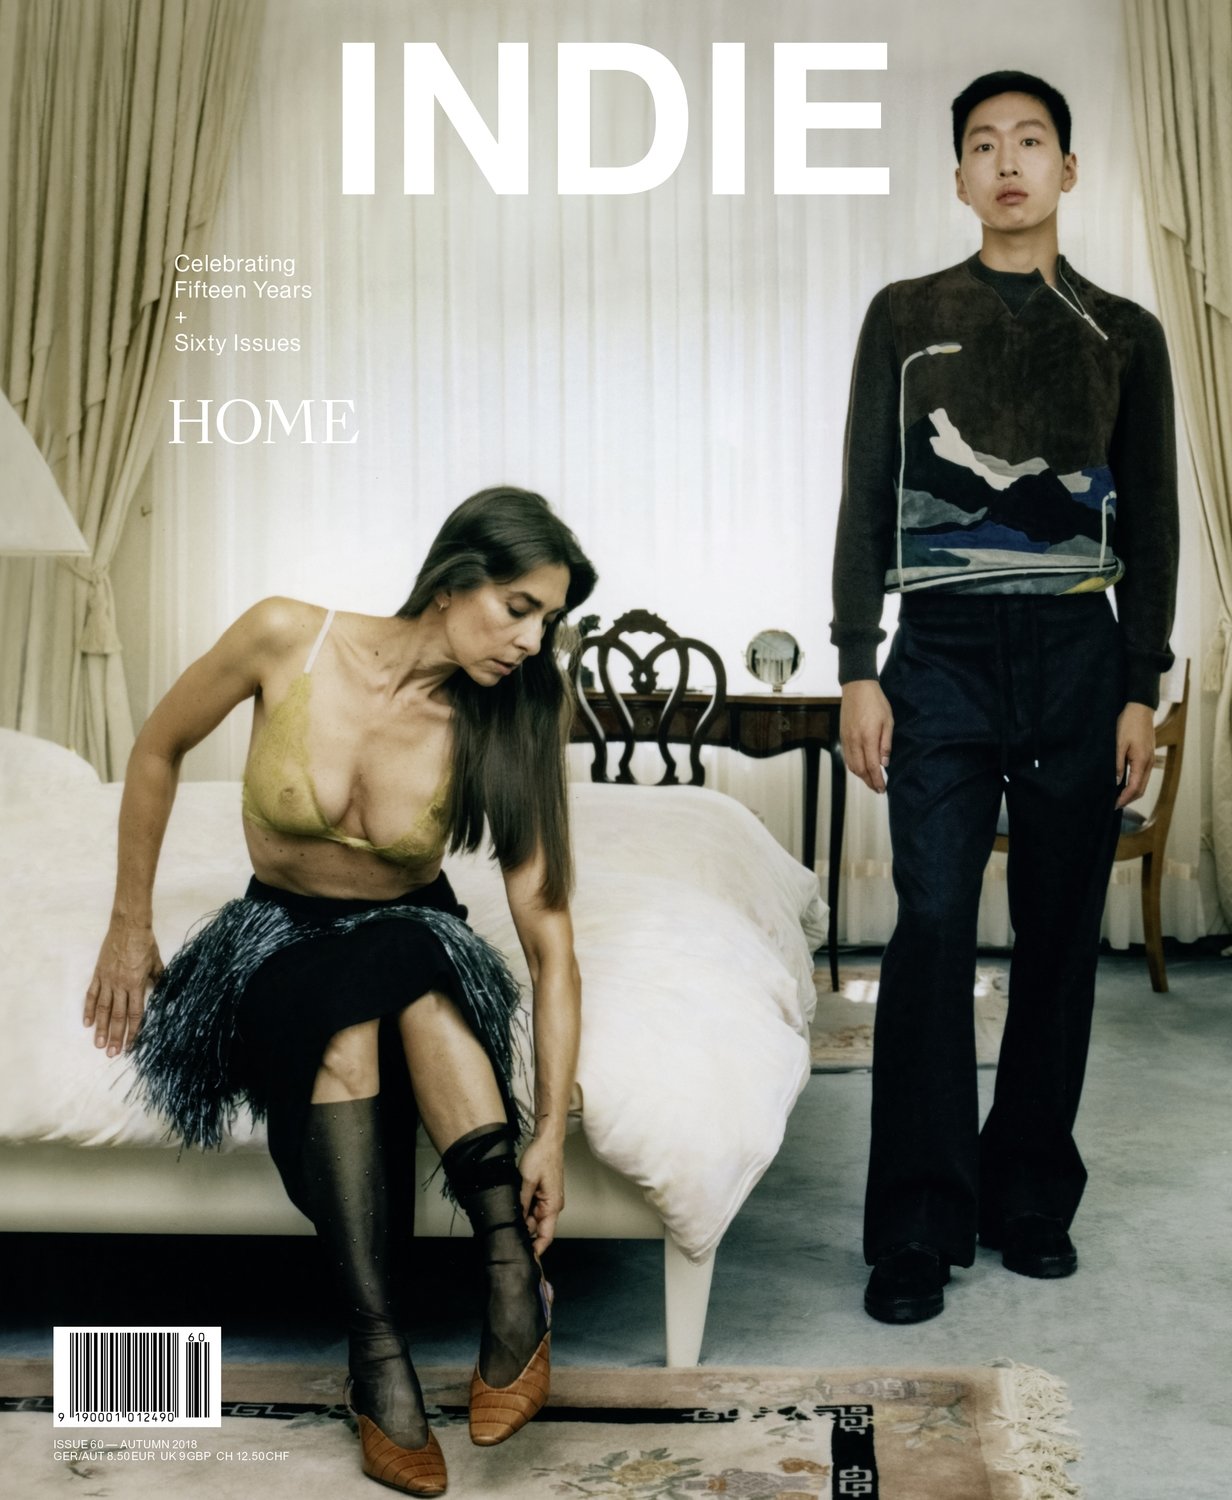 INDIE #60 - The Big 15 Years Anniversary Issue - Cover 4